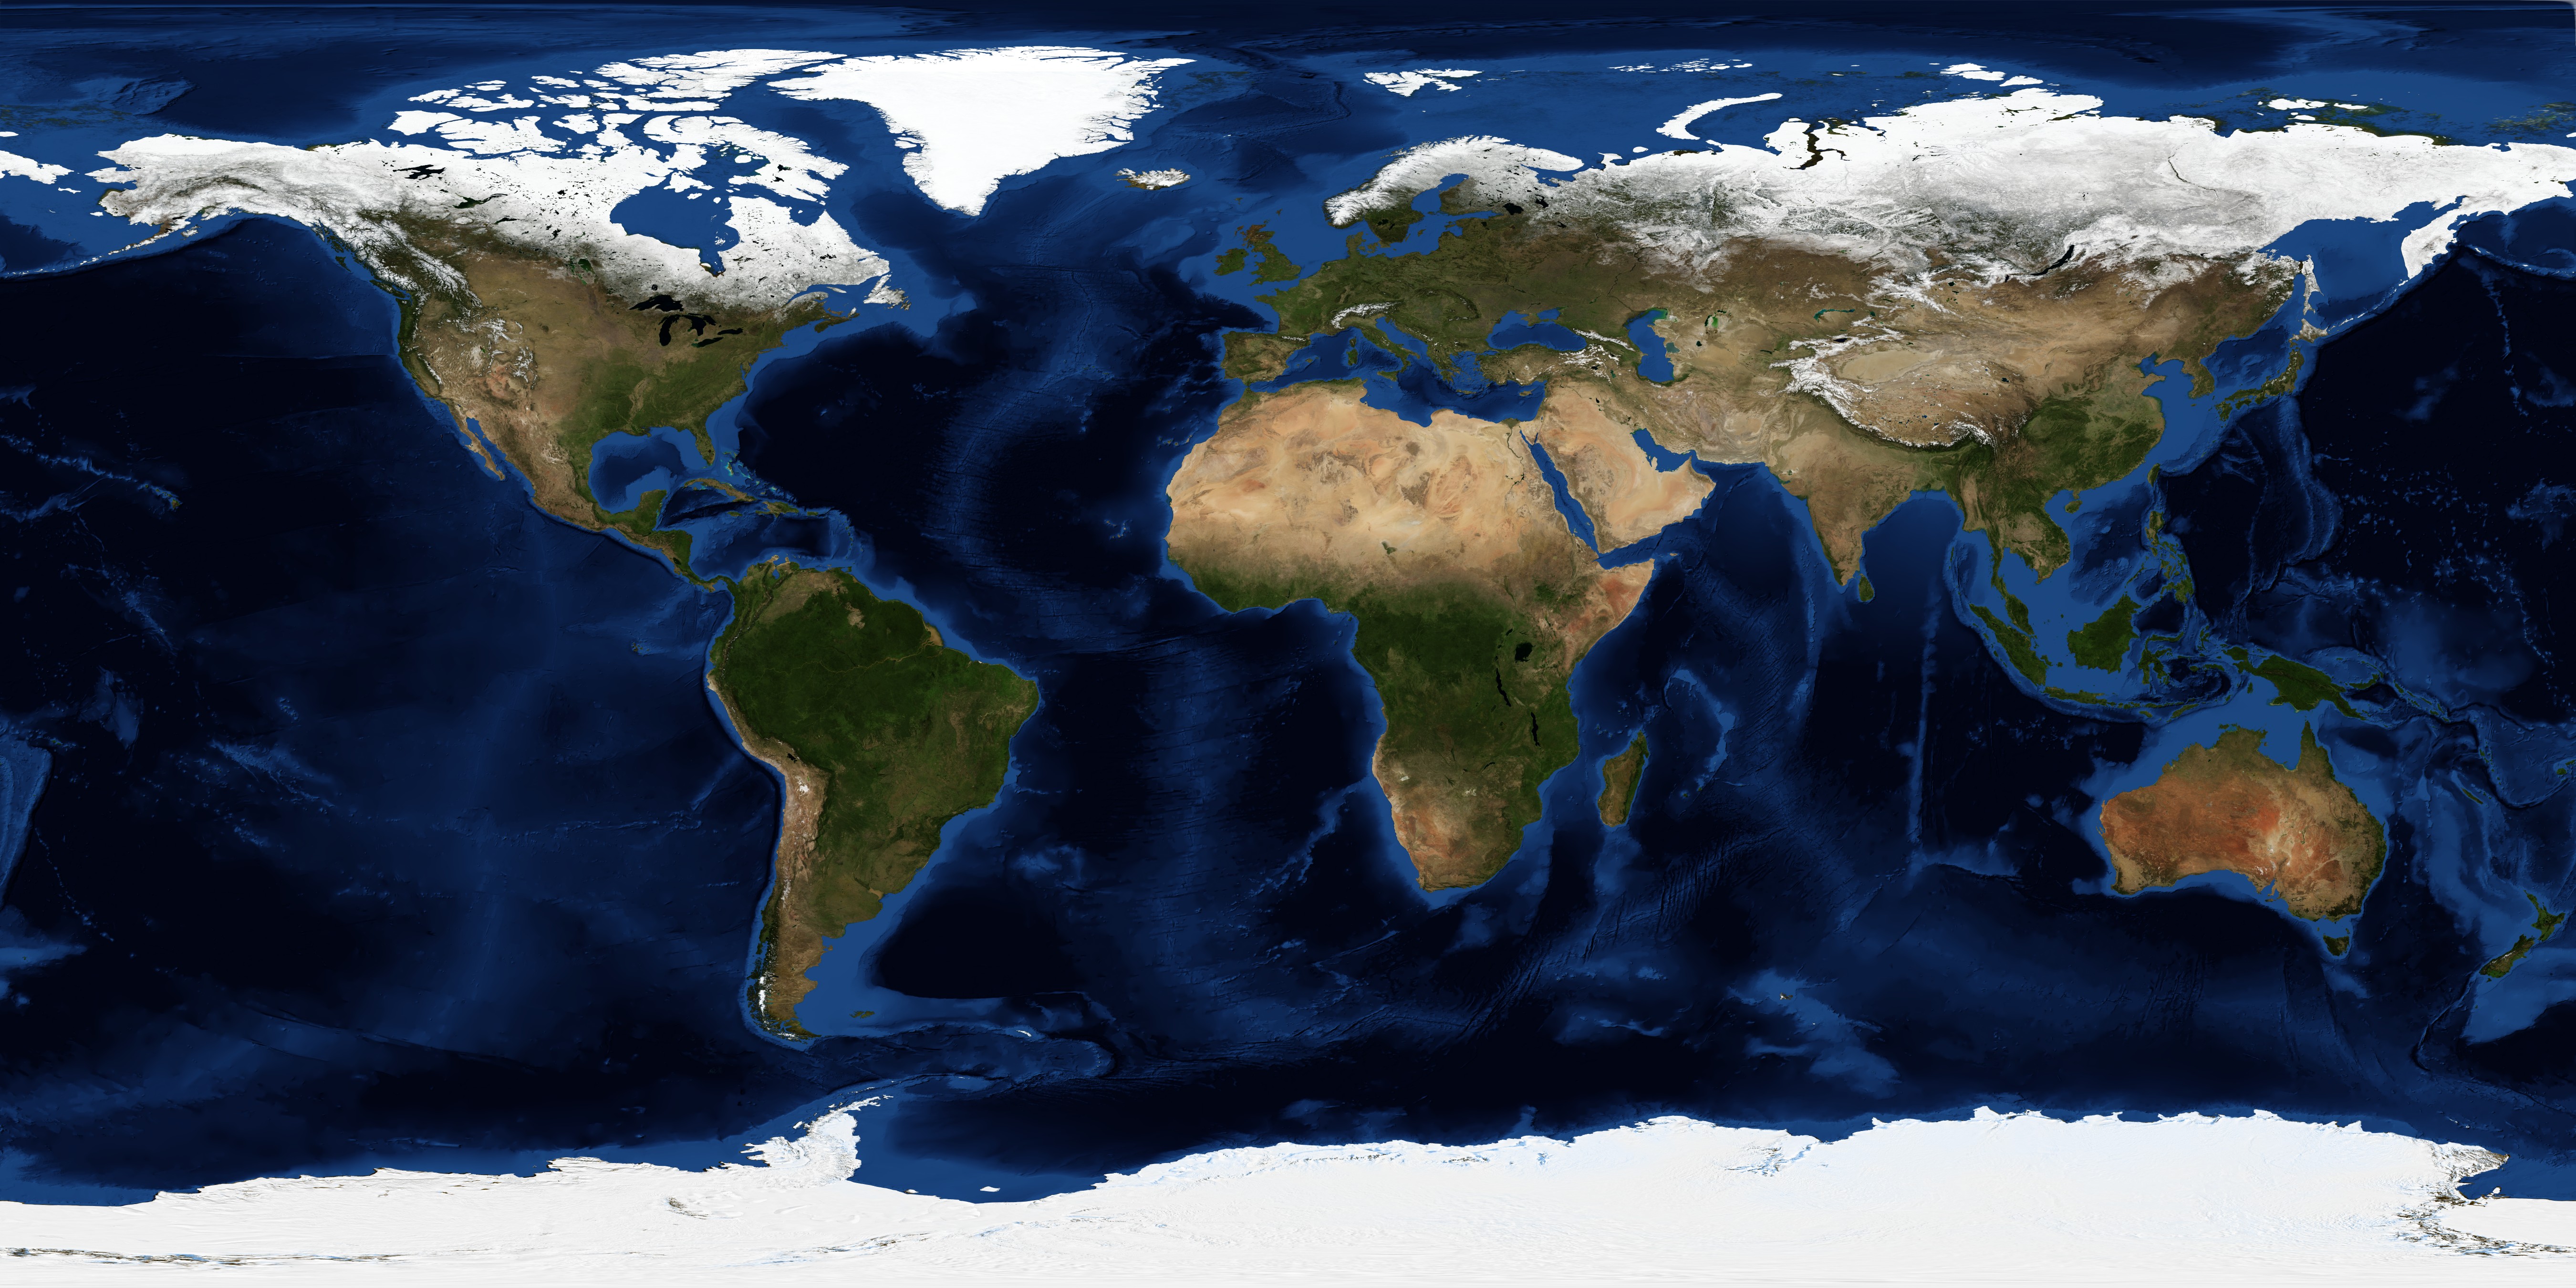 April, Blue Marble Next Generation w/ Topography and Bathymetry - related image preview